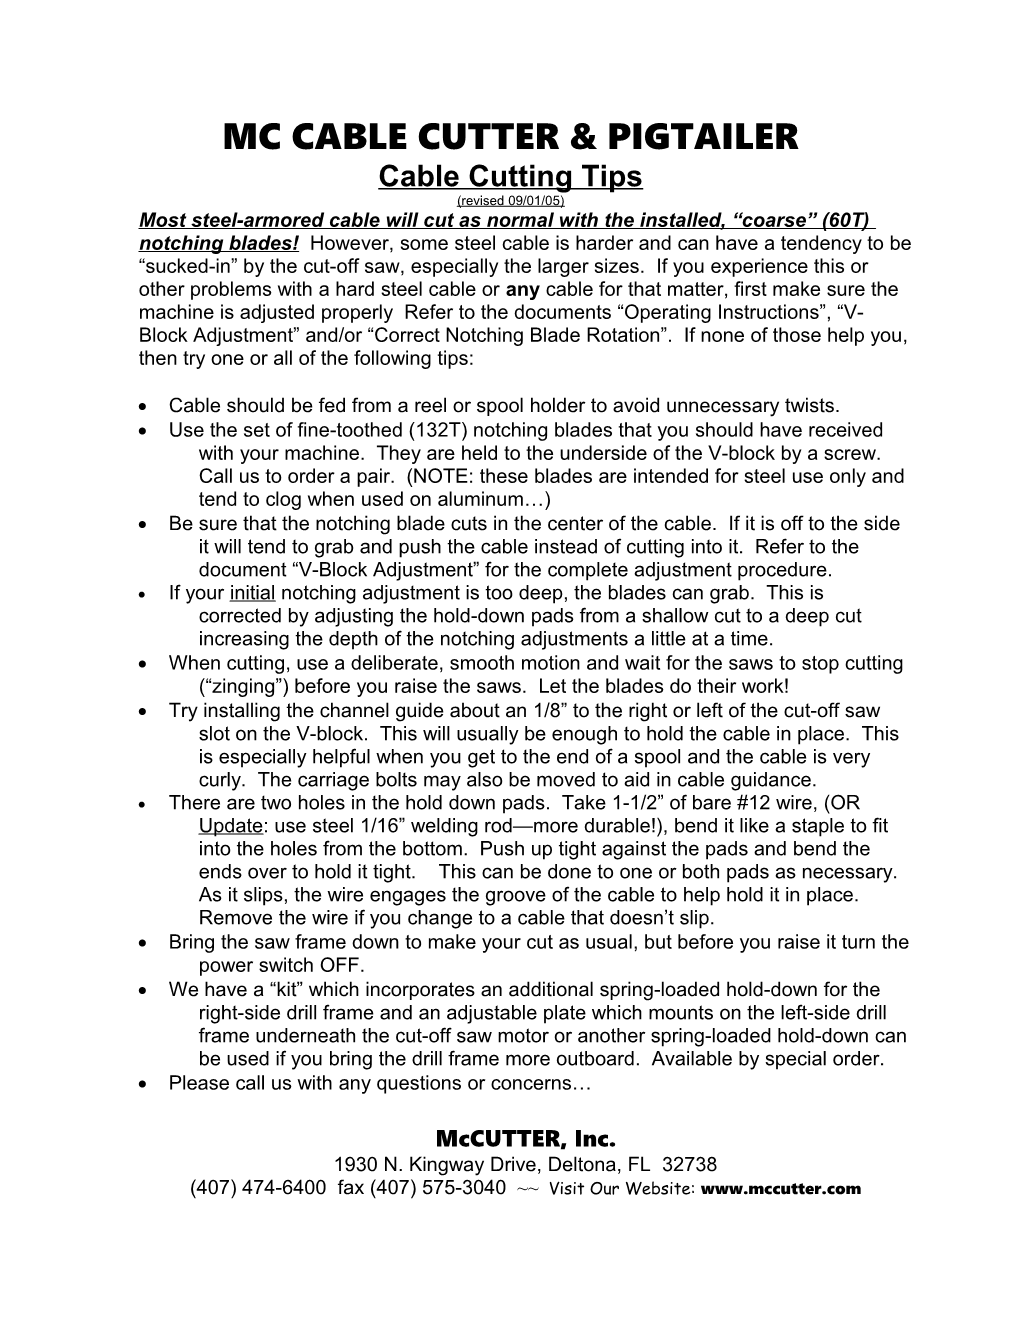 MC Cable Cutter and Pigtailer Operating Instructions